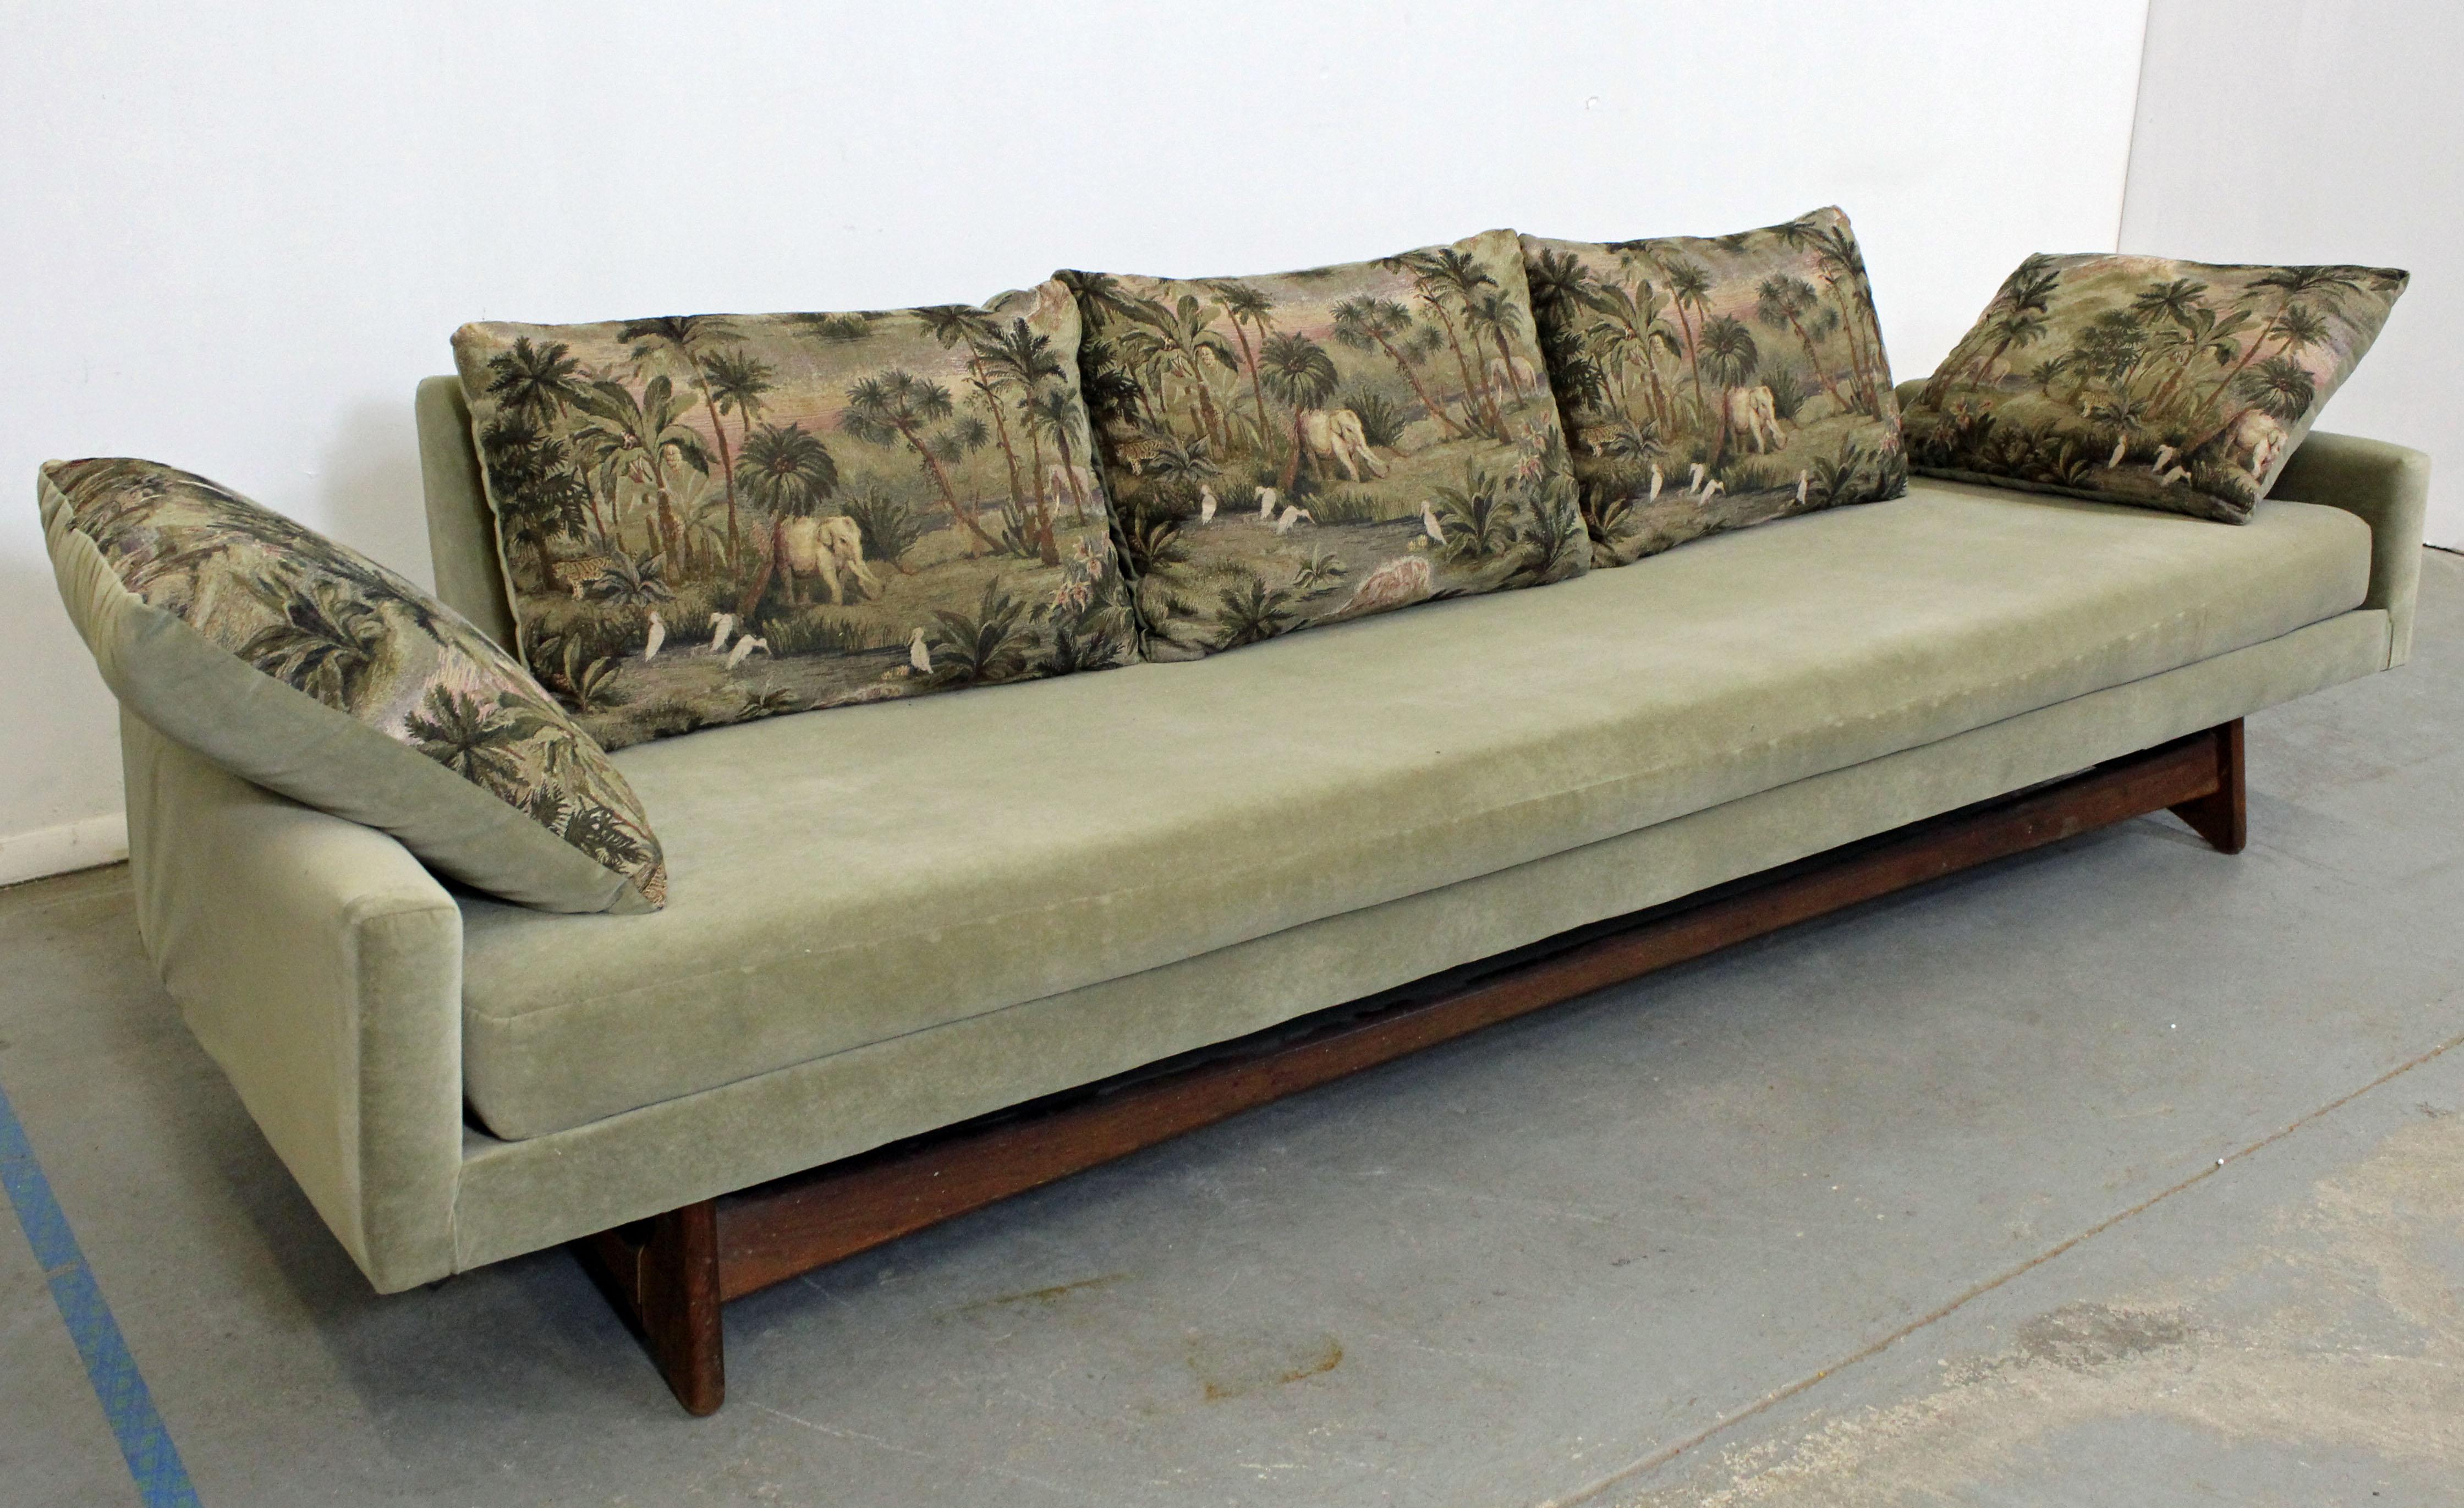 What a find. Offered is a beautiful Mid-Century Modern sofa with sculptural wood legs, designed by Adrian Pearsall for Craft Associates. It is in good condition, with some age wear (custom upholstery, previous repairs on legs; see pictures). Can be